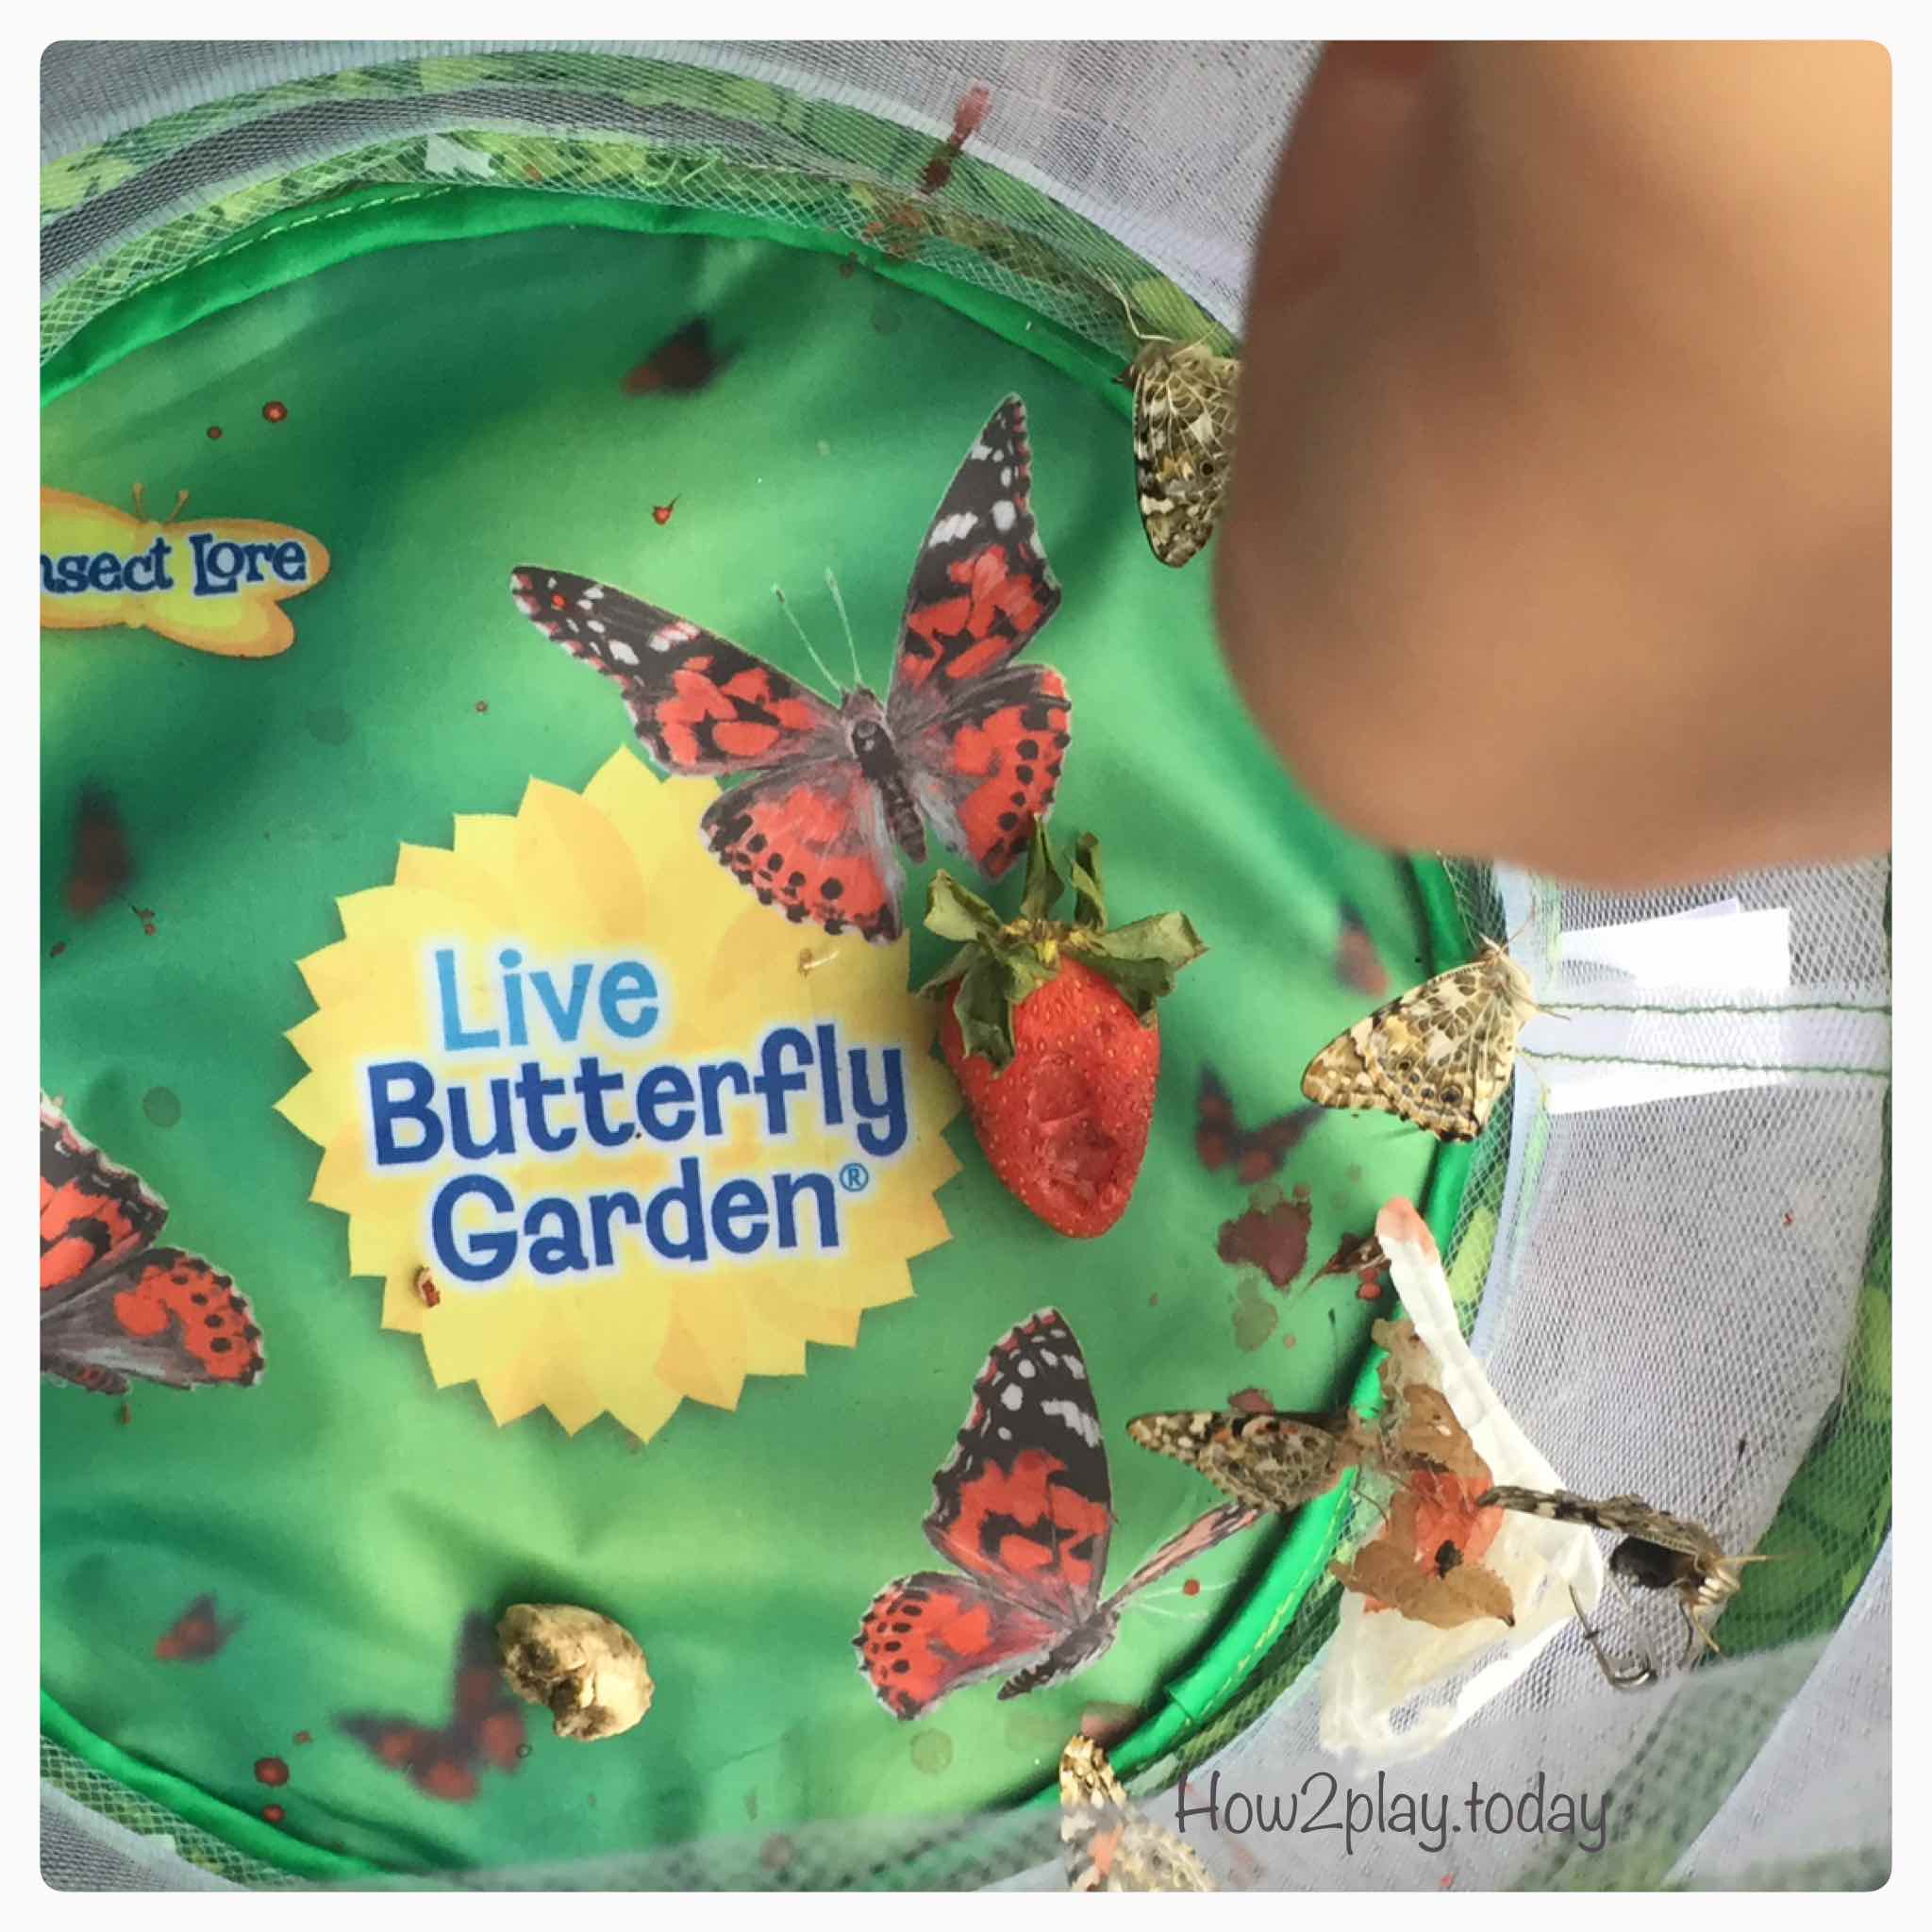 Studying Butterflies with this Butterfly Lore kit